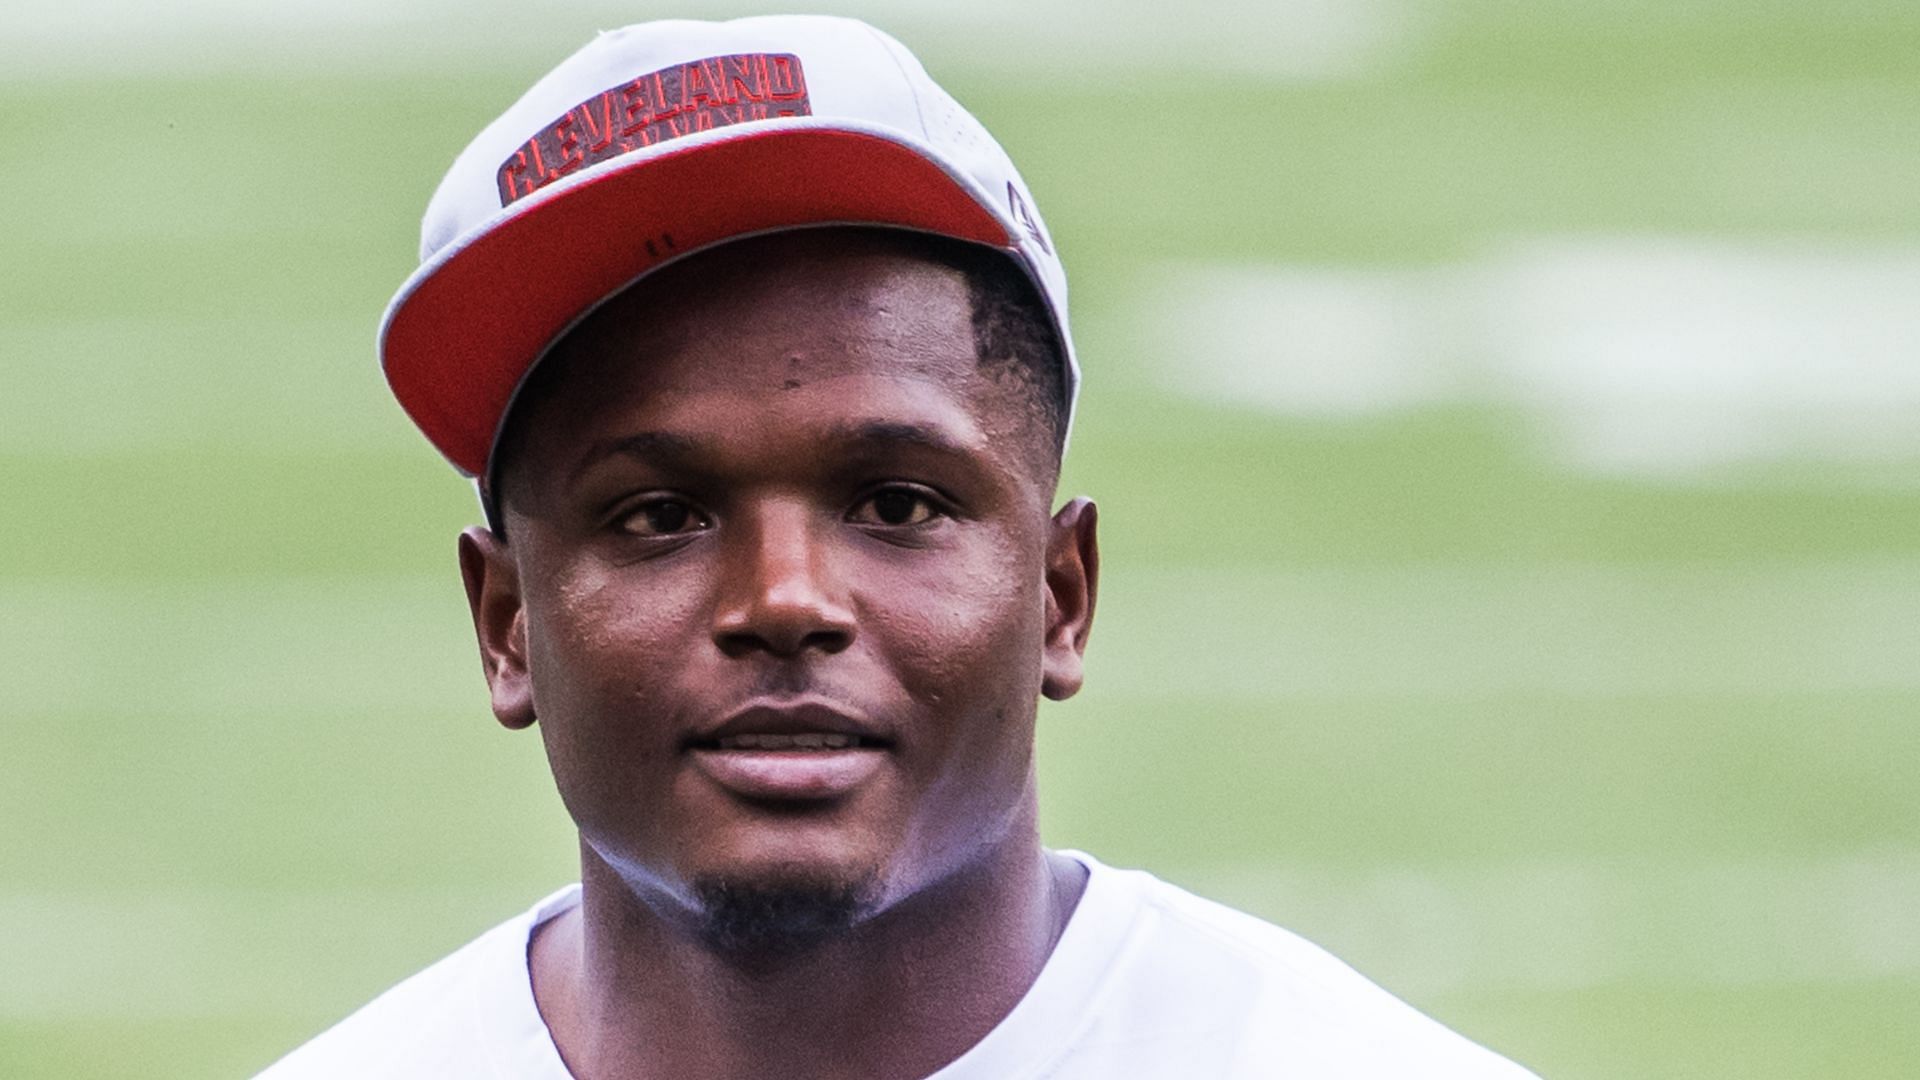 The Dallas Cowboys released Antonio Callaway after getting arrested for driving with a suspended license. (Image credit: Erik Drost/Wikipedia)